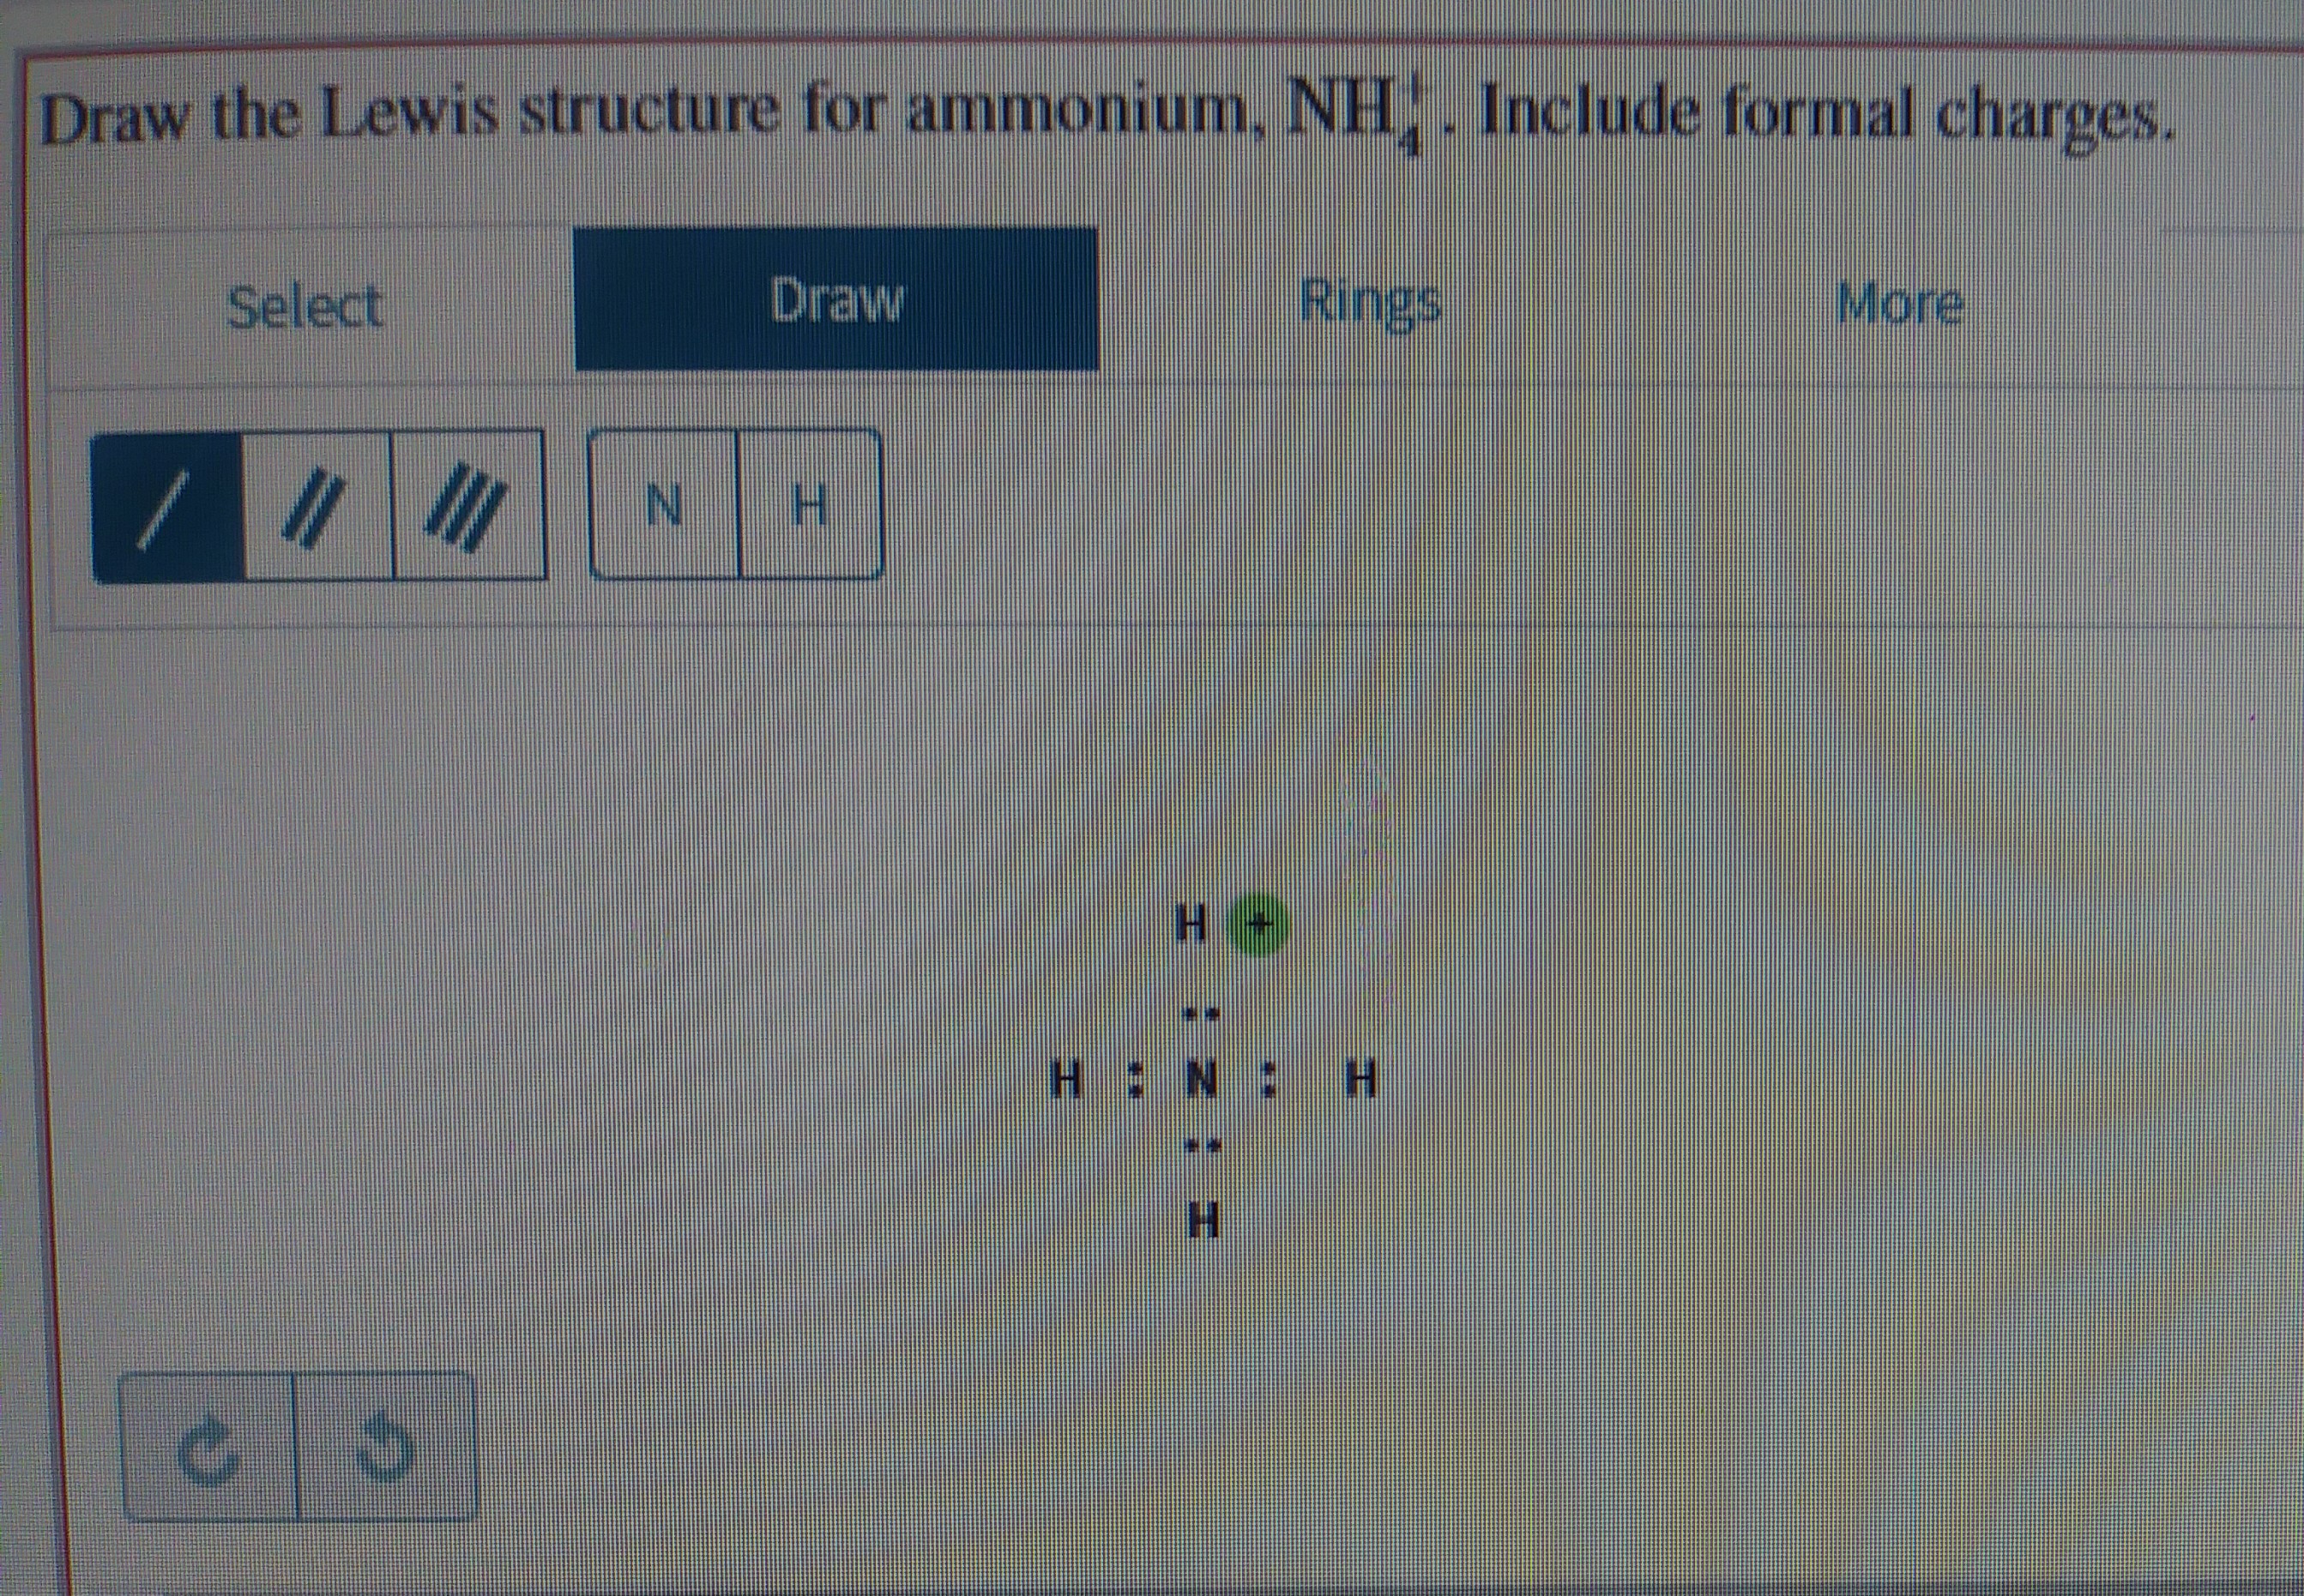 Draw the Lewis structure for ammonium, NH,. Include formal charges.
Draw
Rings
More
Select
II
H.
H.
H N:H
H.
